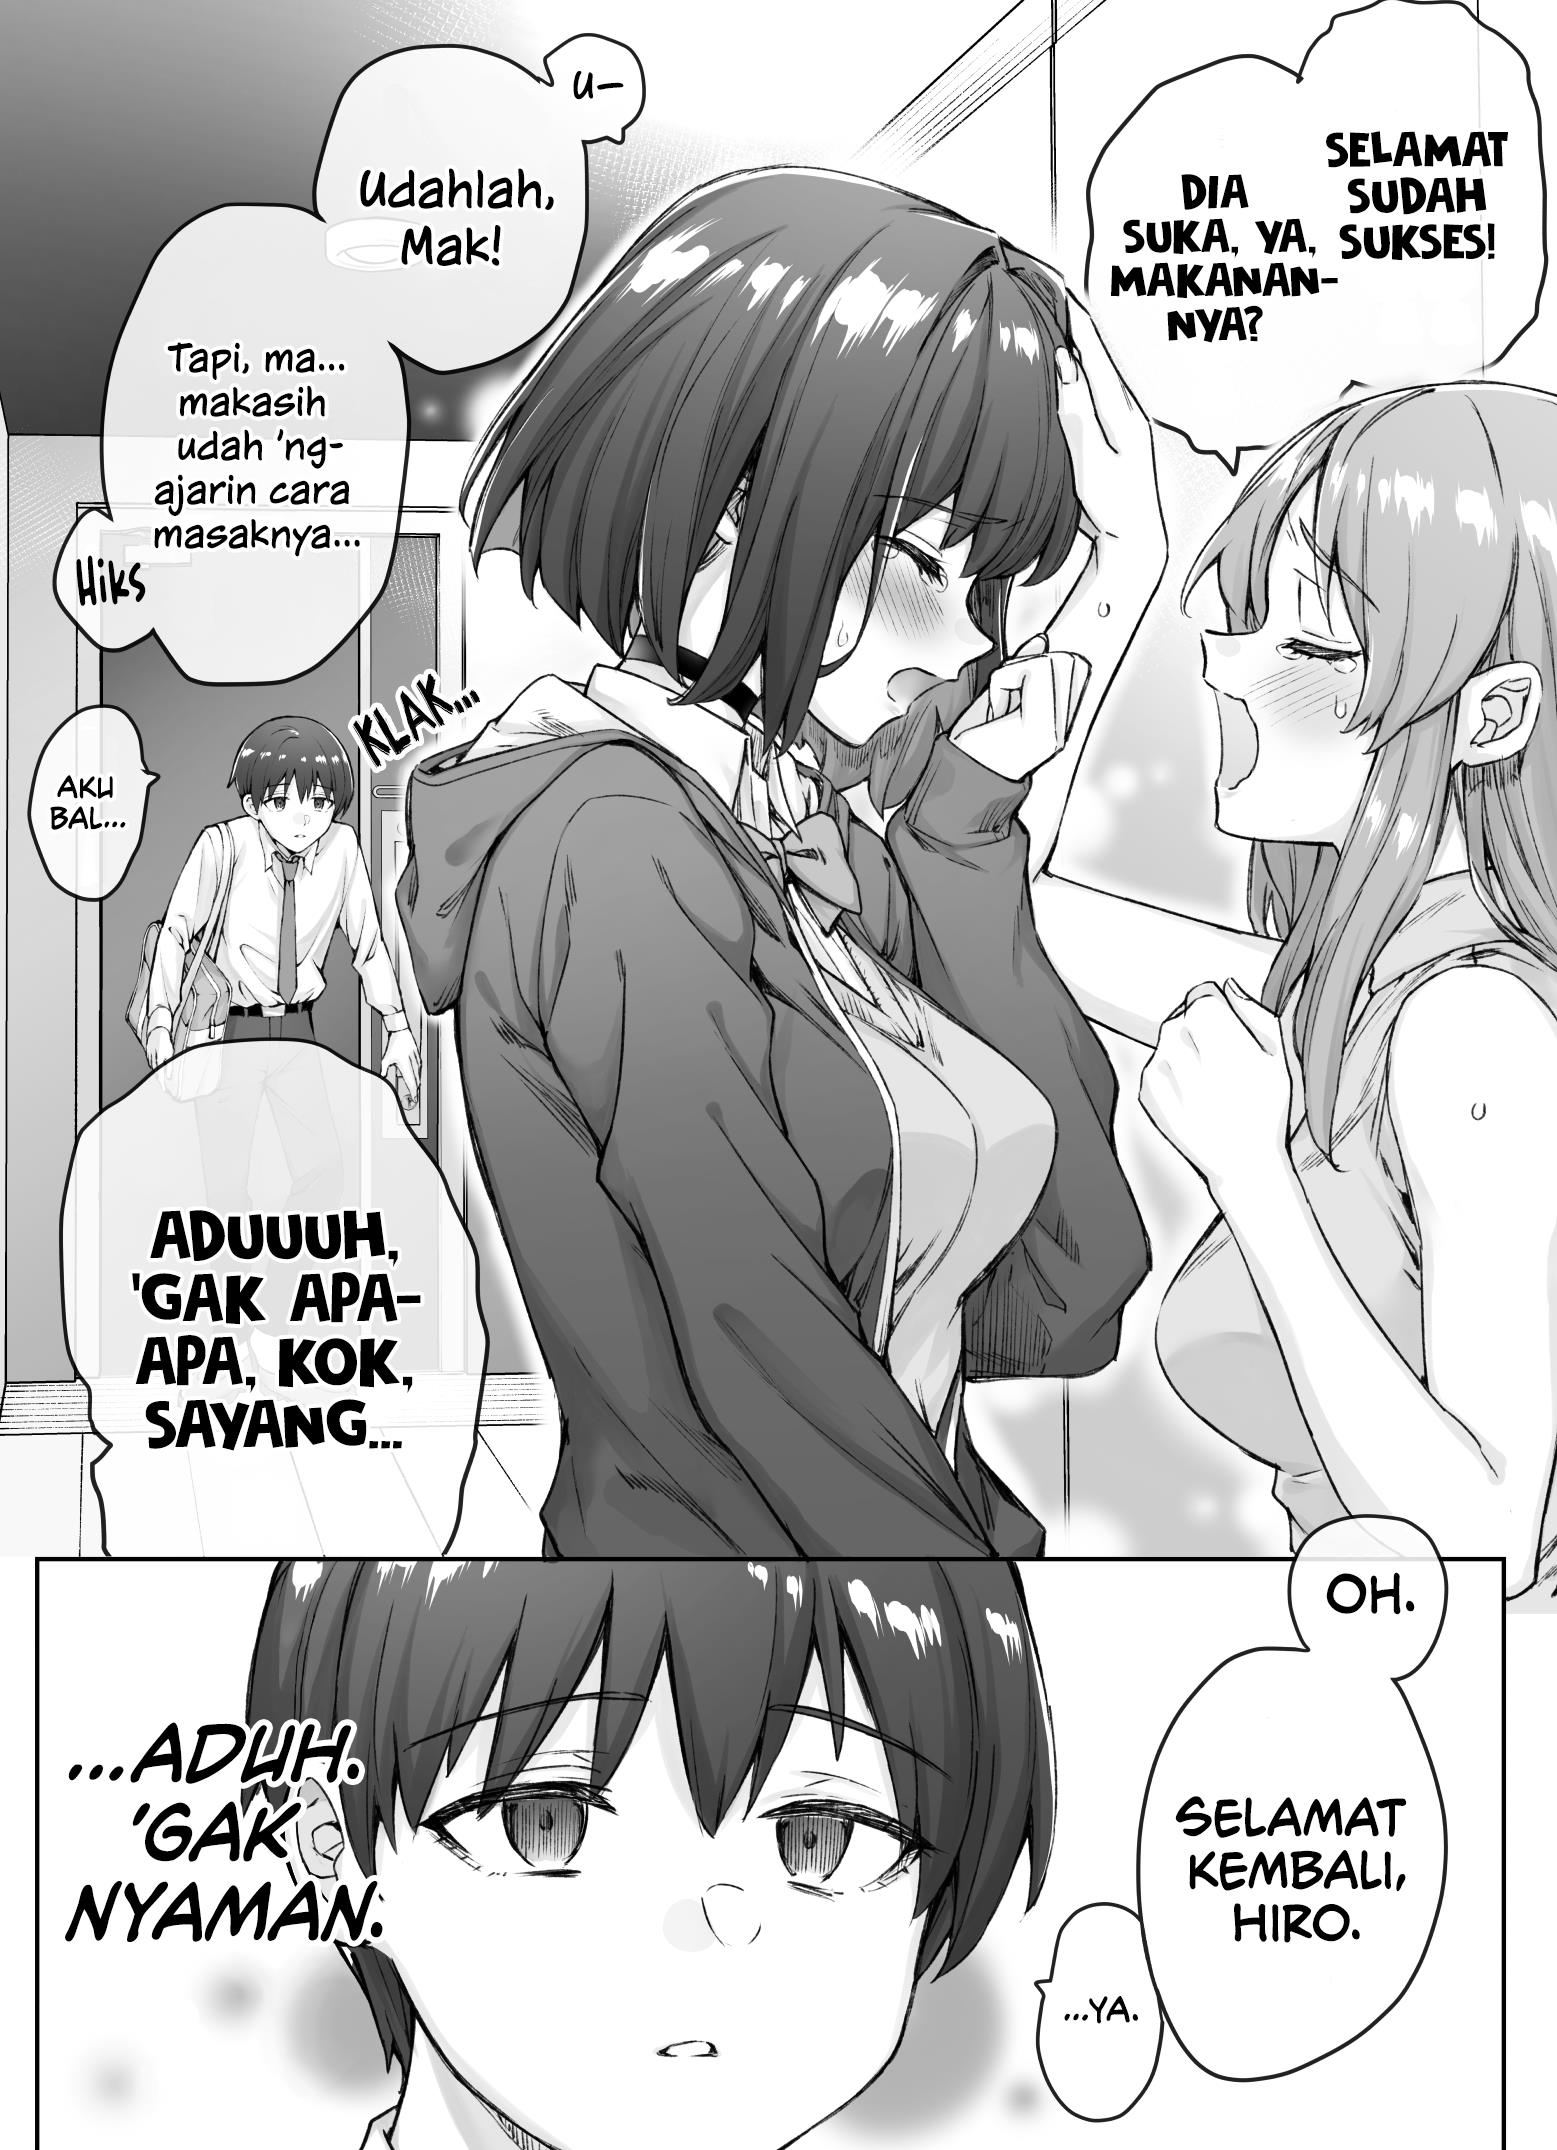 The Tsuntsuntsuntsuntsuntsun tsuntsuntsuntsuntsundere Girl Getting Less and Less Tsun Day by Day Chapter 20.2